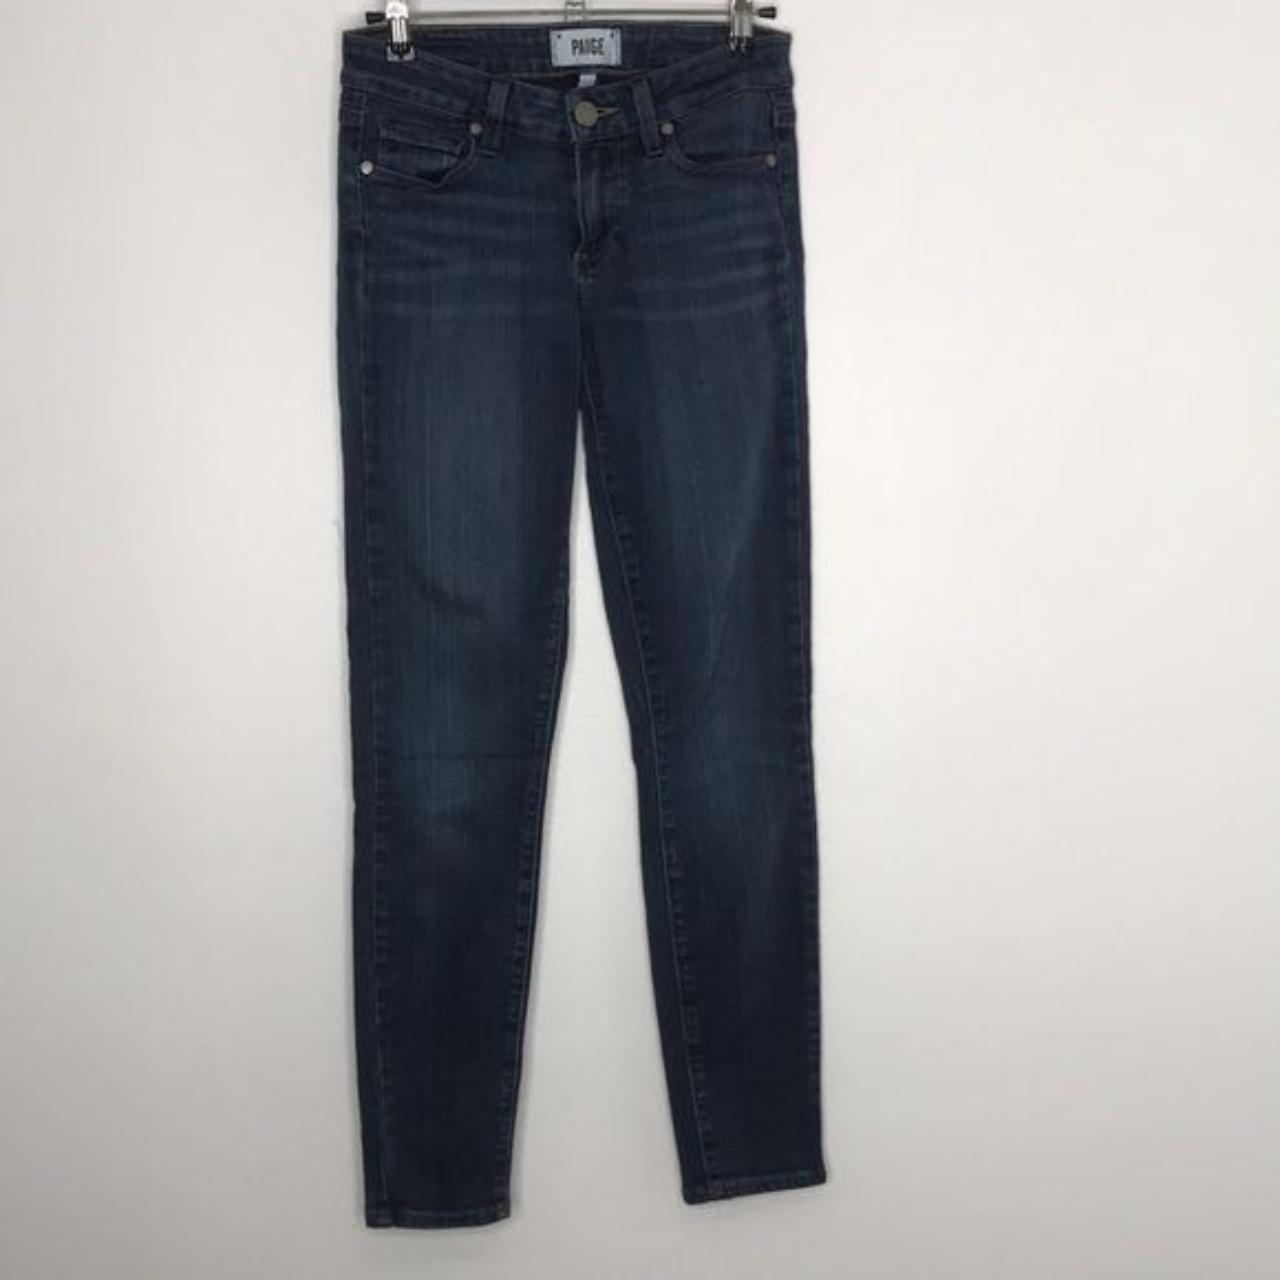 Product Image 1 - PAIGE Verdugo Ankle Skinny Jeans